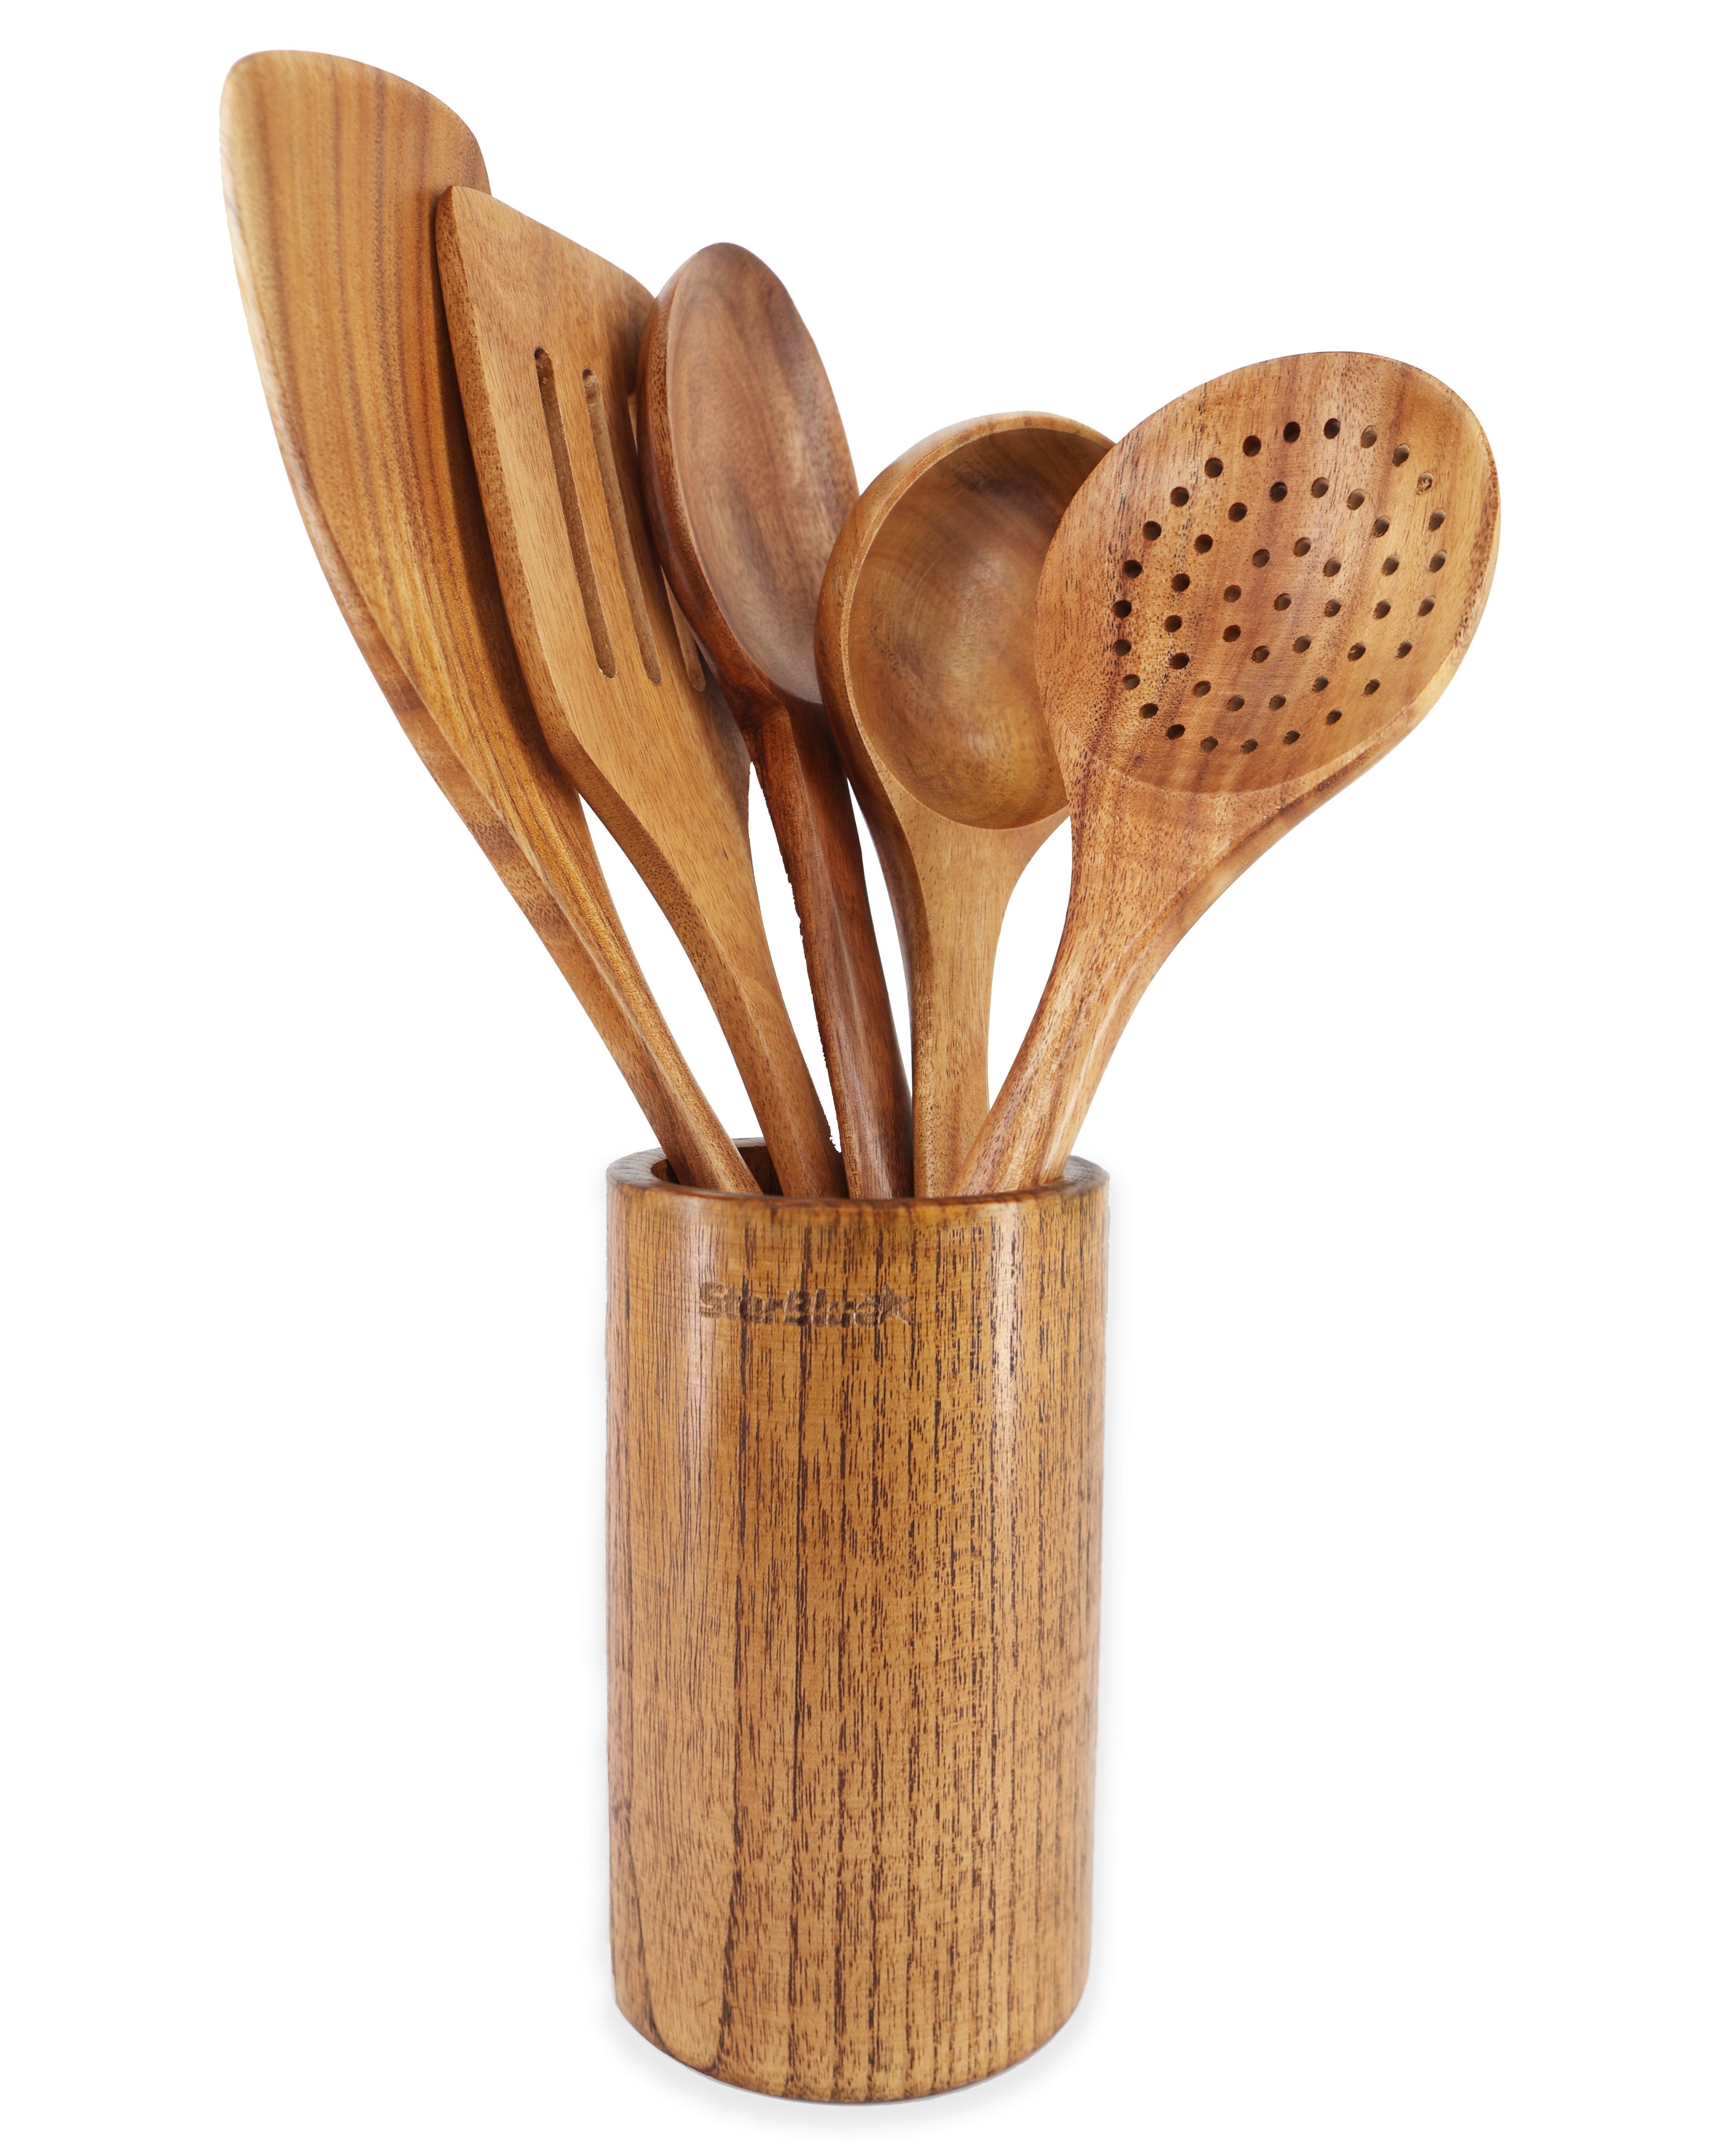  Acacia Wooden Utensils Set 6 Pcs by StarBlue - Non